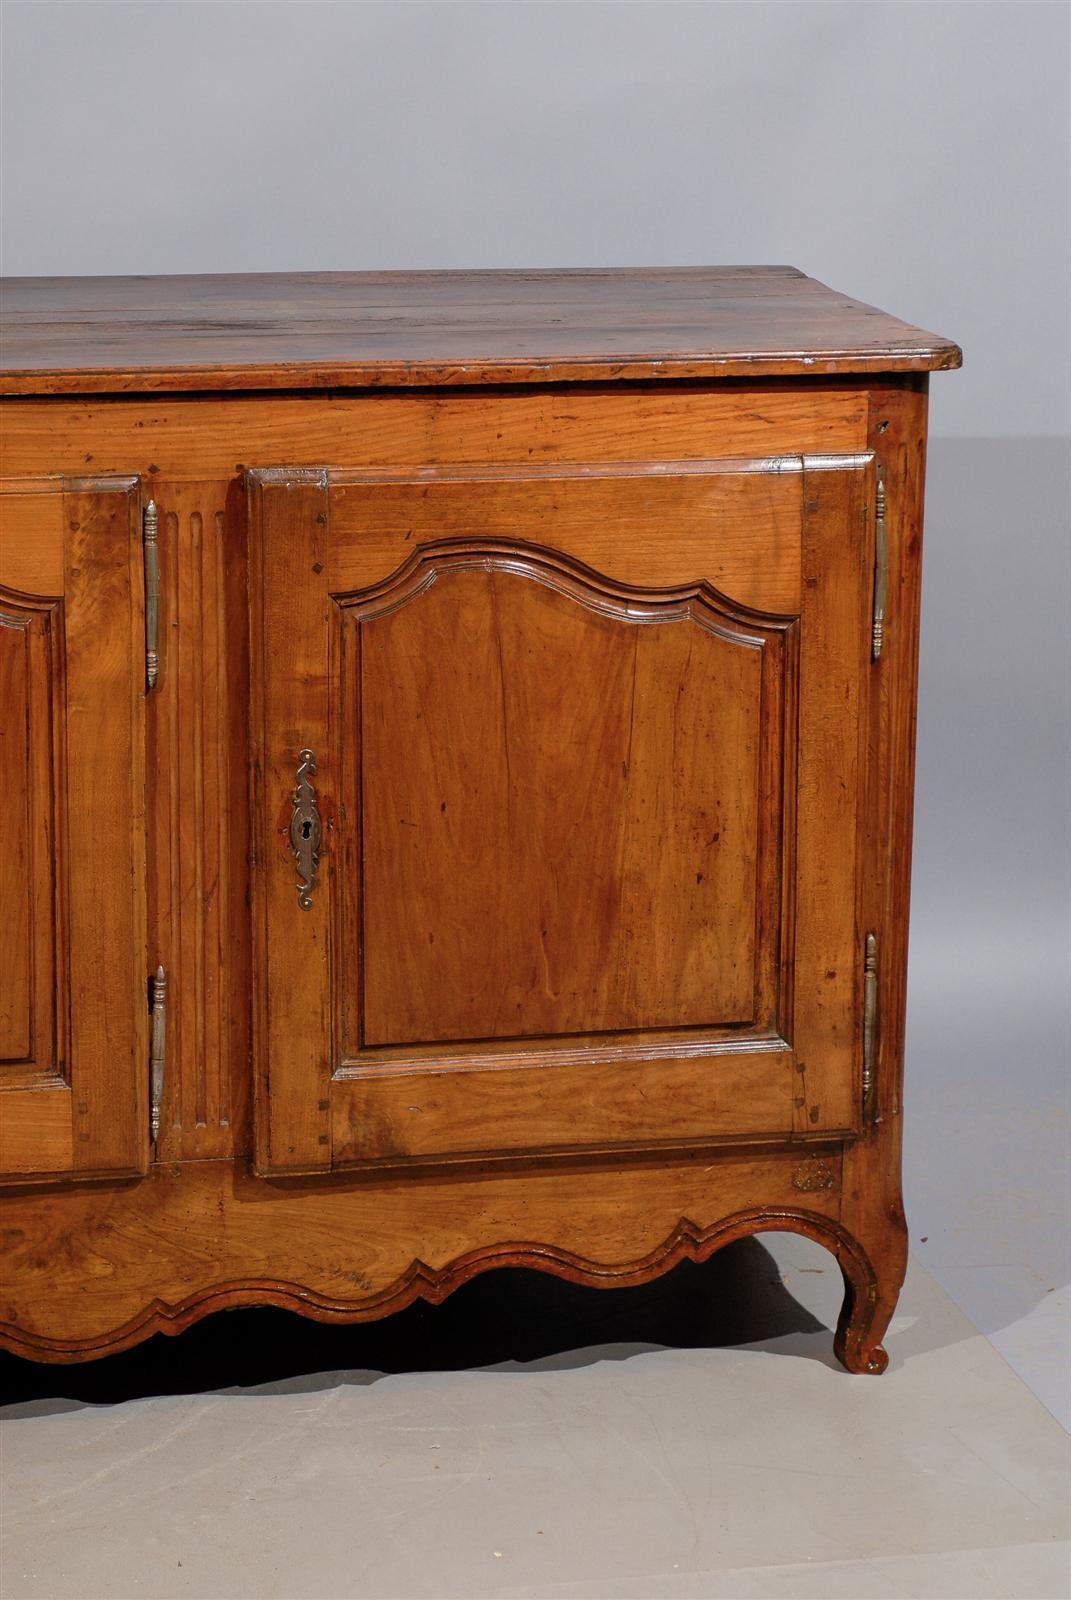 Early 19th Century Transitional Louis XV/XVI French Fruitwood Enfilade with Three Doors, circa 1800